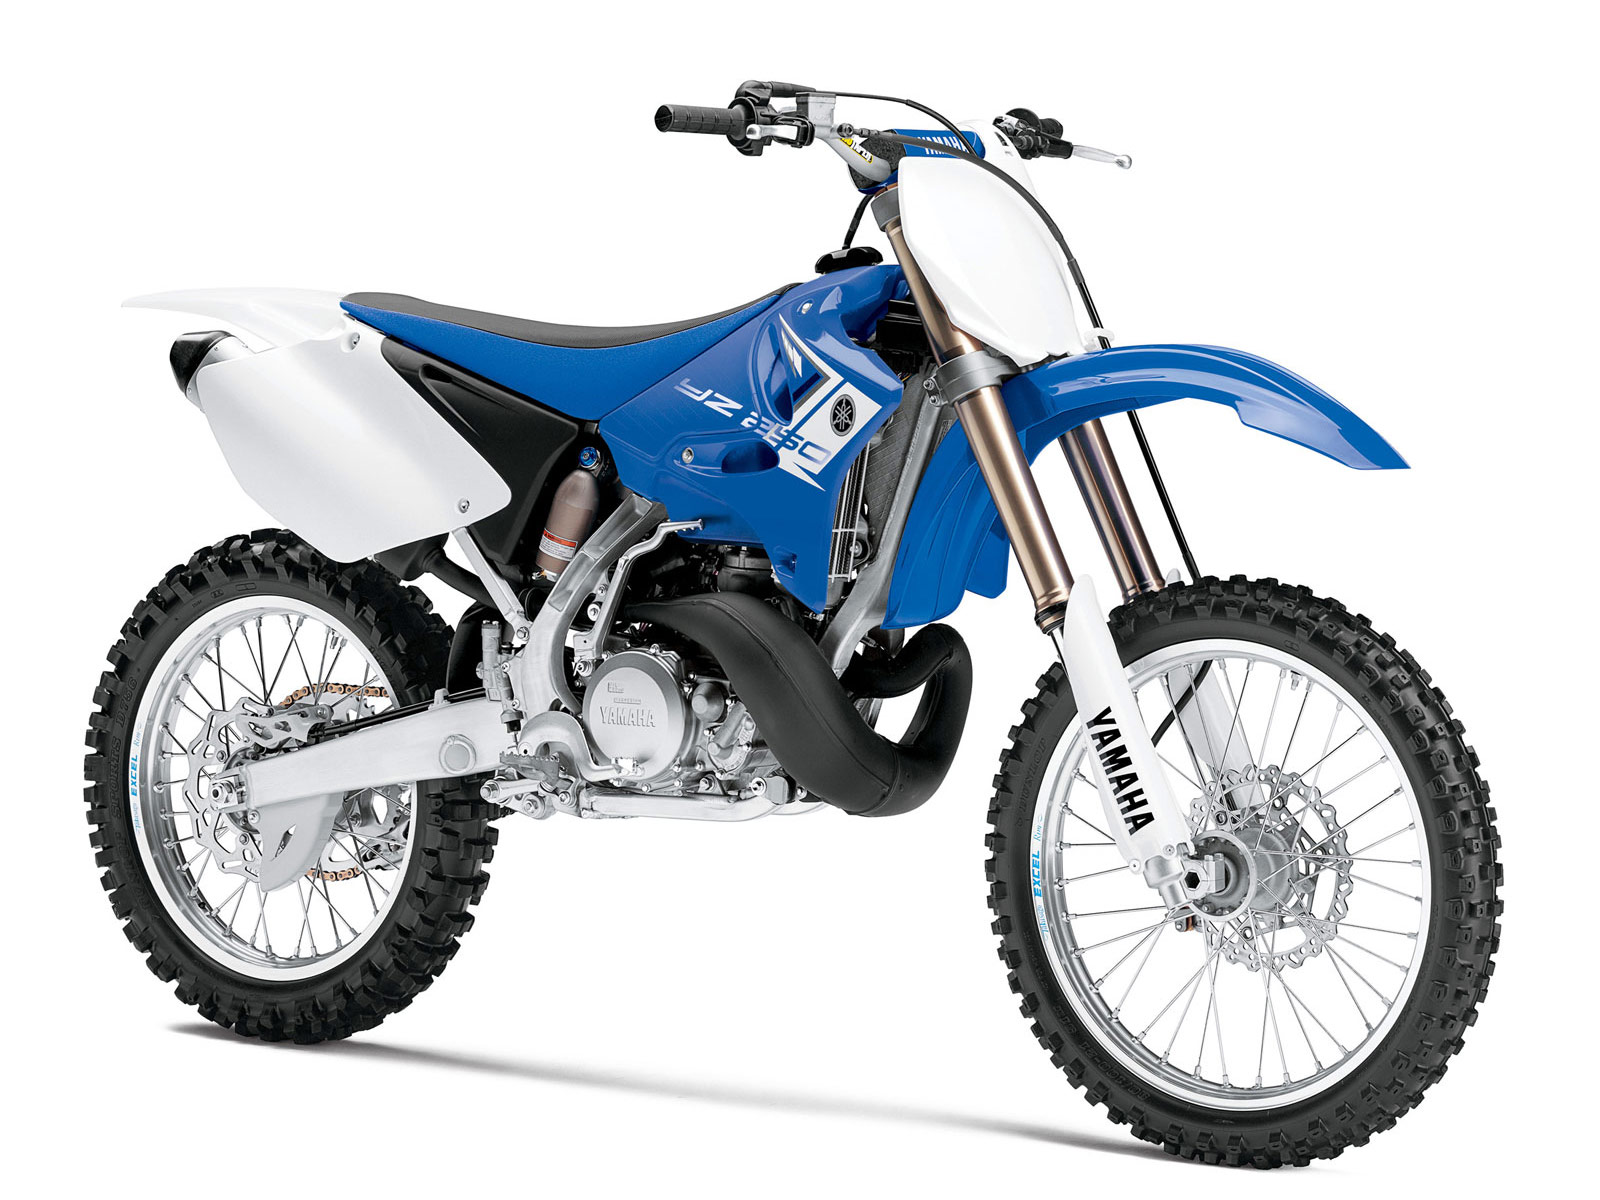 yamaha 250 2 stroke  yamaha durability plus 2 strokes are easier and cost less to maintain